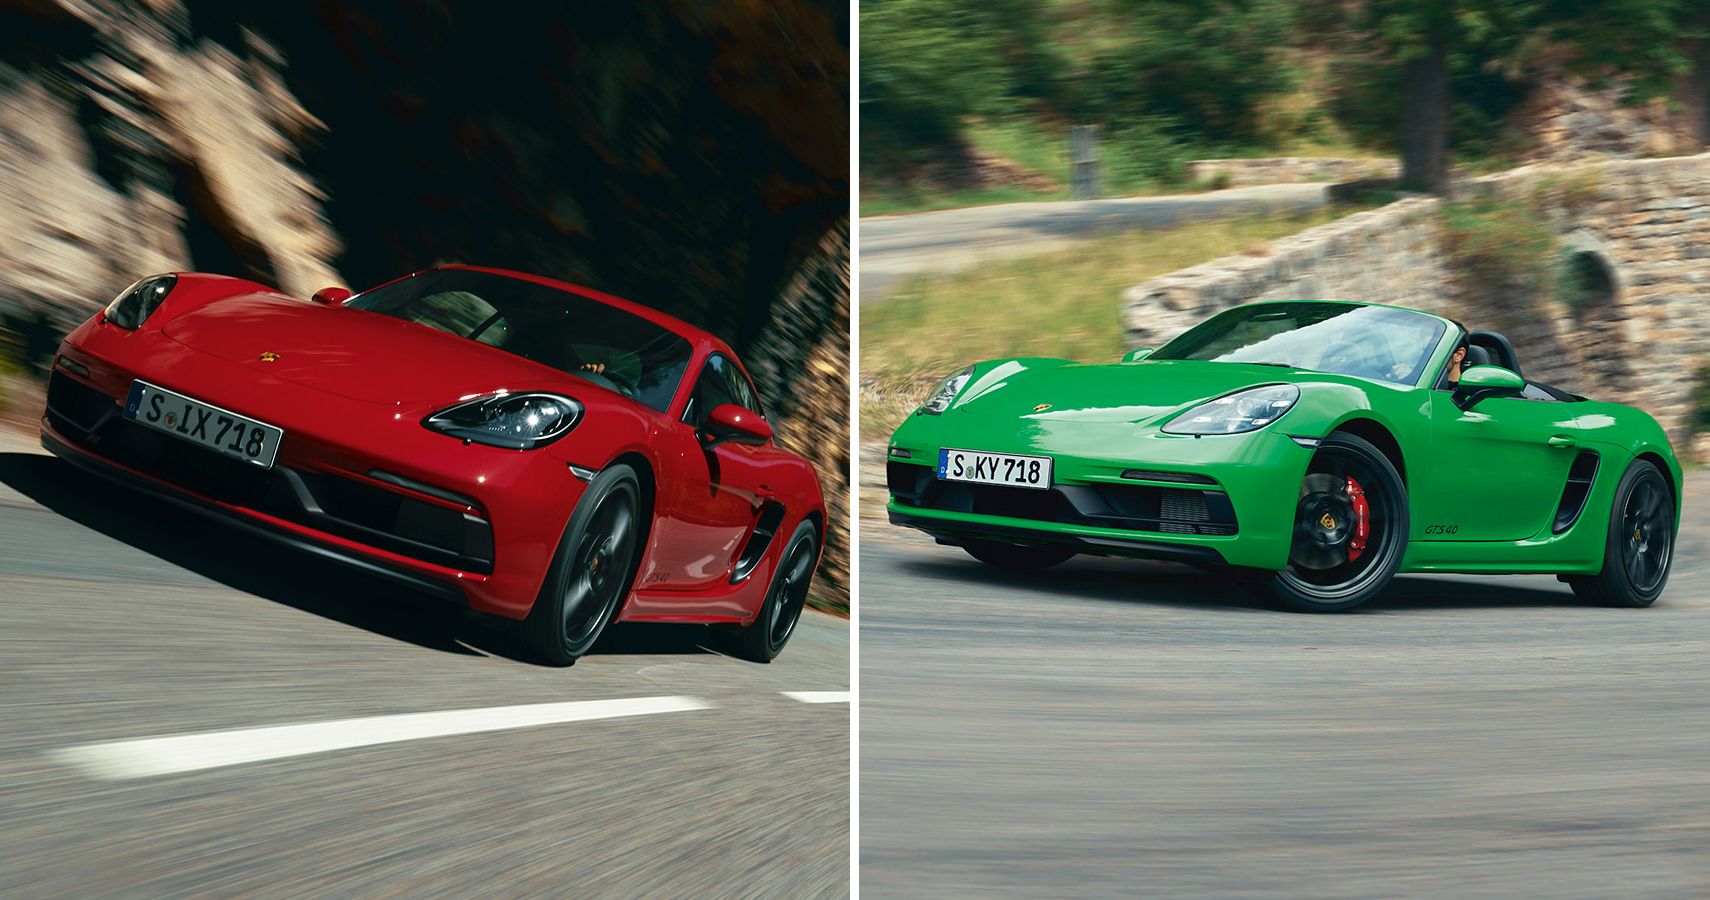 Porsche 718 Cayman GTS 4.0 and 718 Boxster GTS 4.0